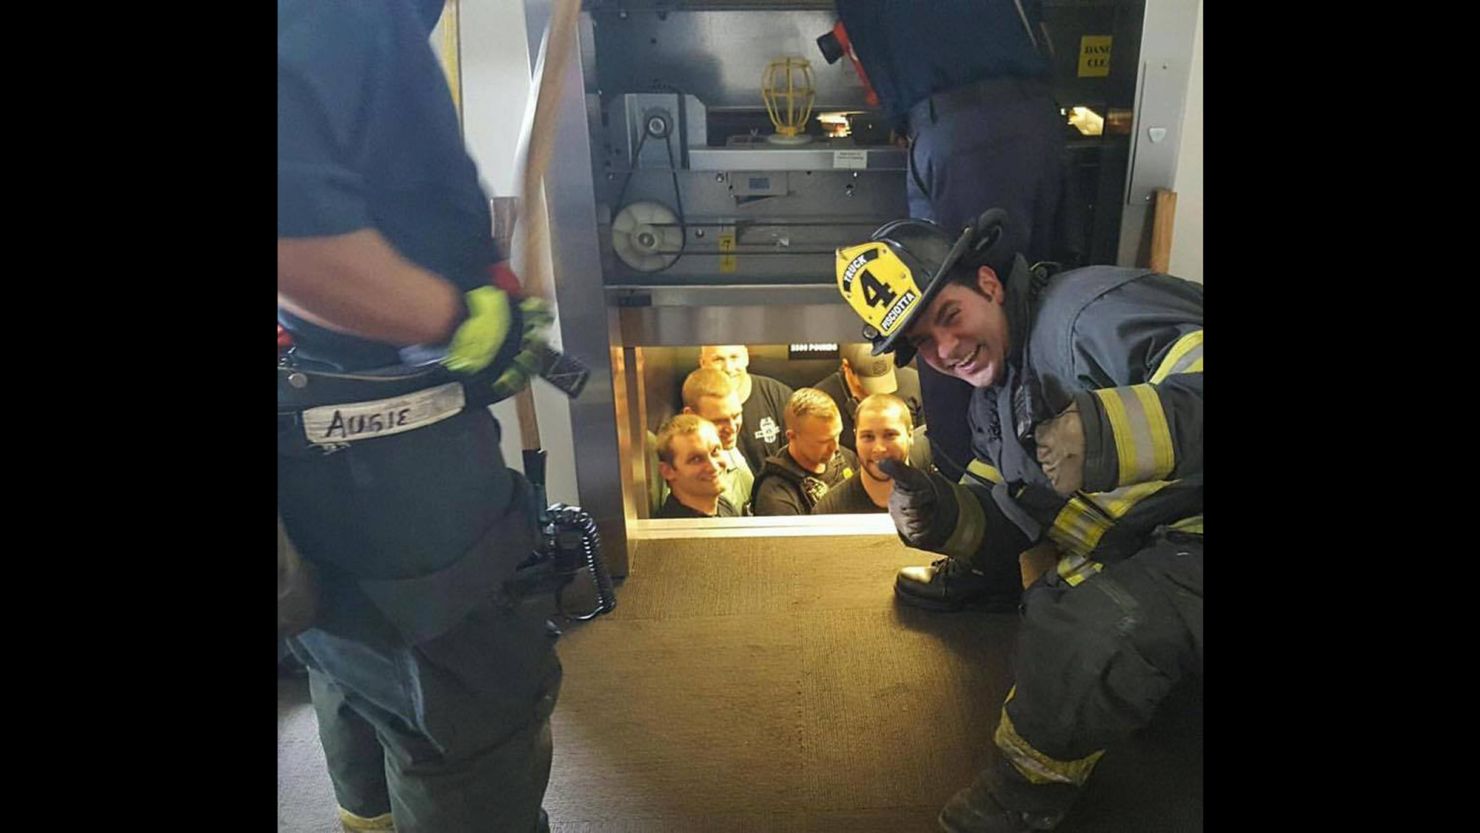 The Kansas City, Missouri Fire Department shared this image of police being rescued from an elevator.